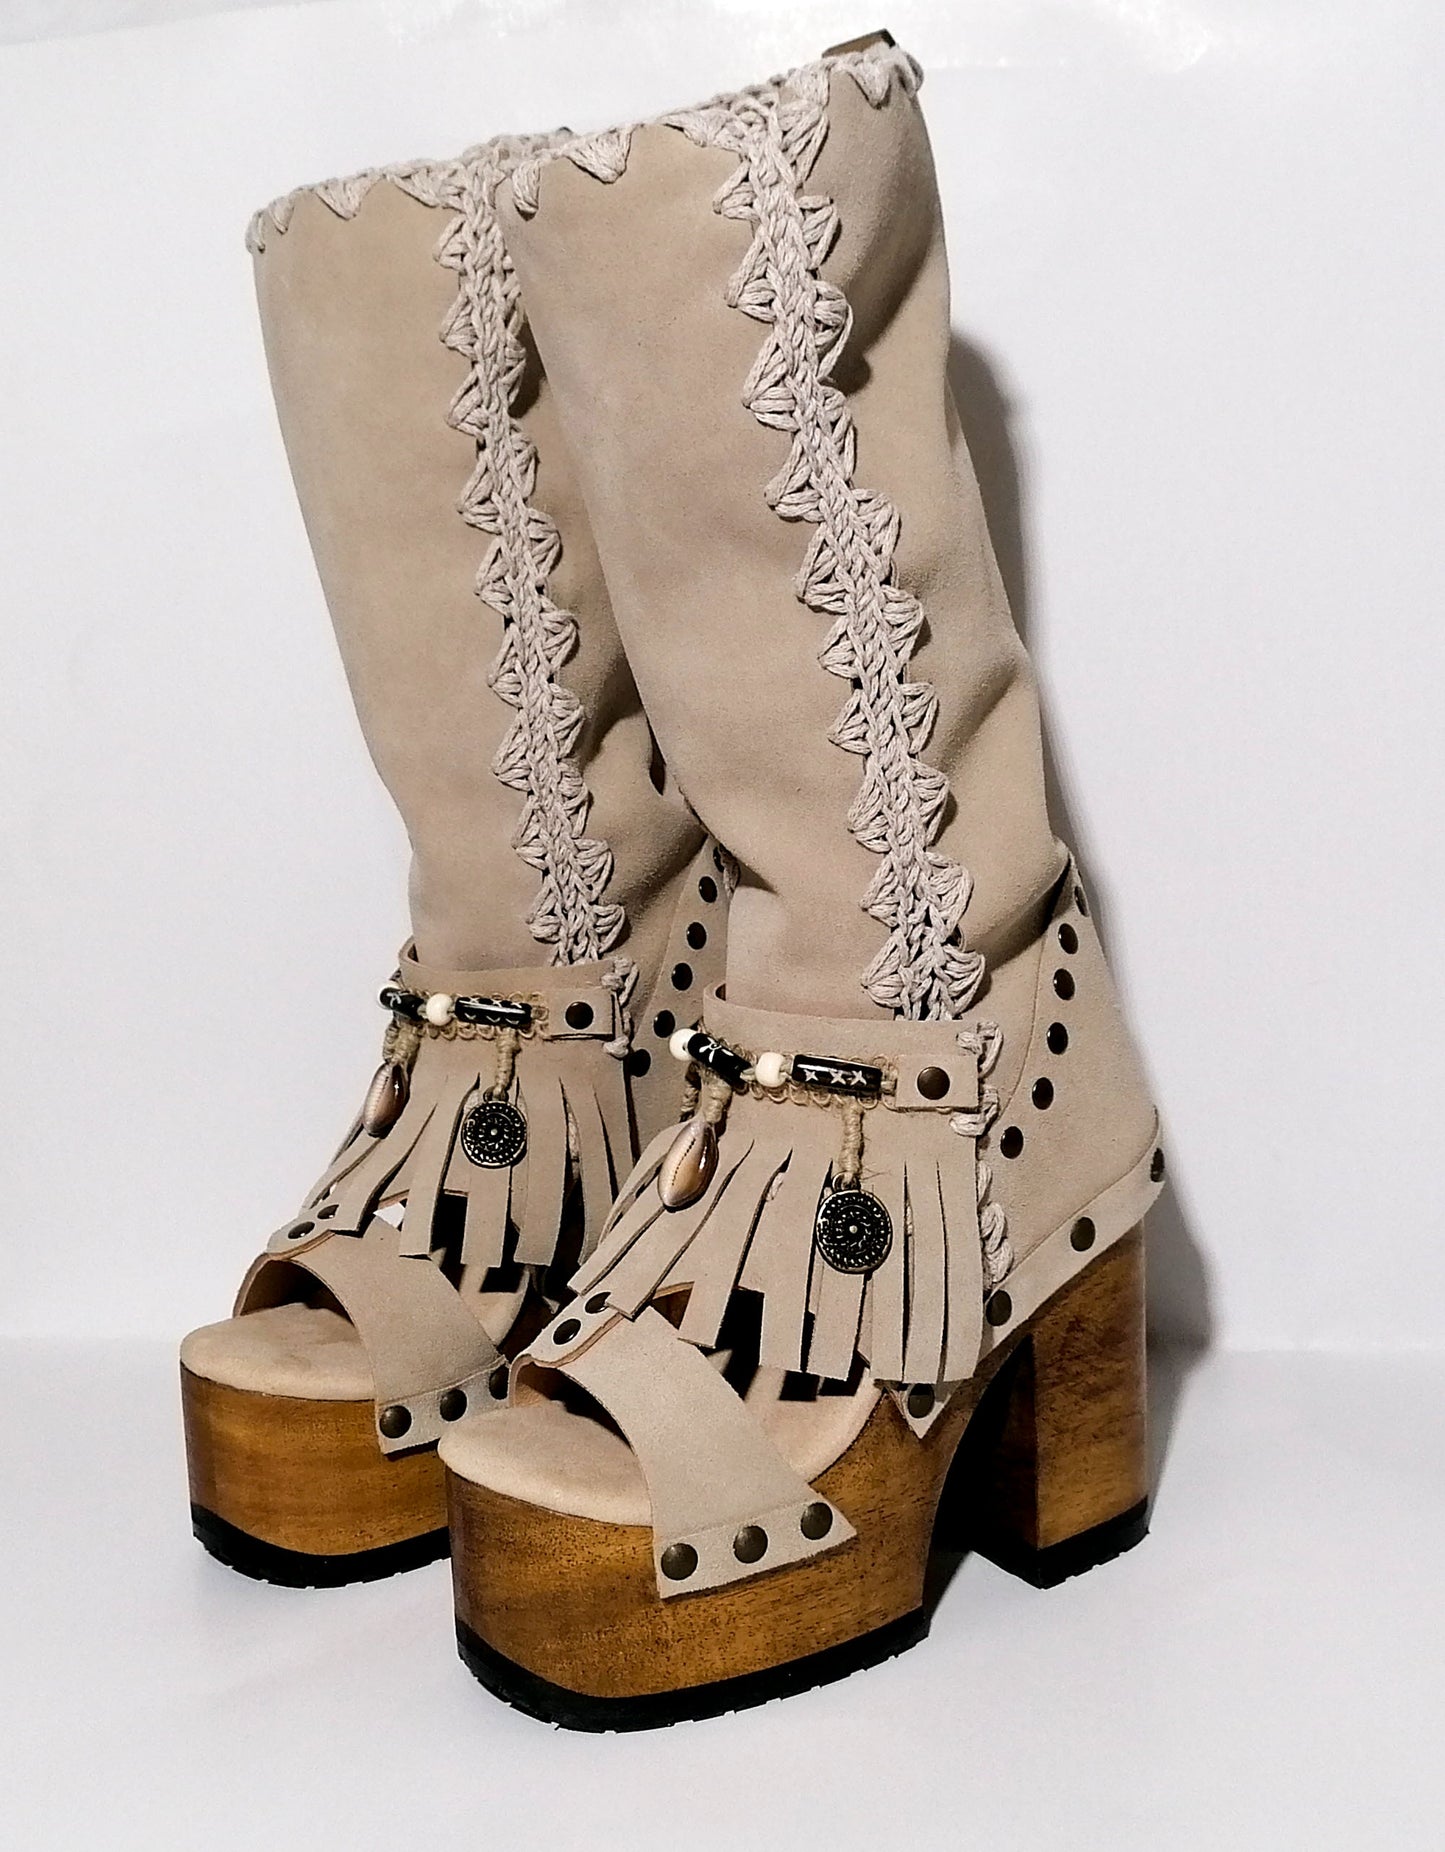 Vintage style wooden heeled clog boot. Suede leather boot decorated with fringes, natural shells, coins and carved bone with an authentic bohemian style. Boho style boots. Sizes 34 to 47. Handmade leather footwear by sol Caleyo.